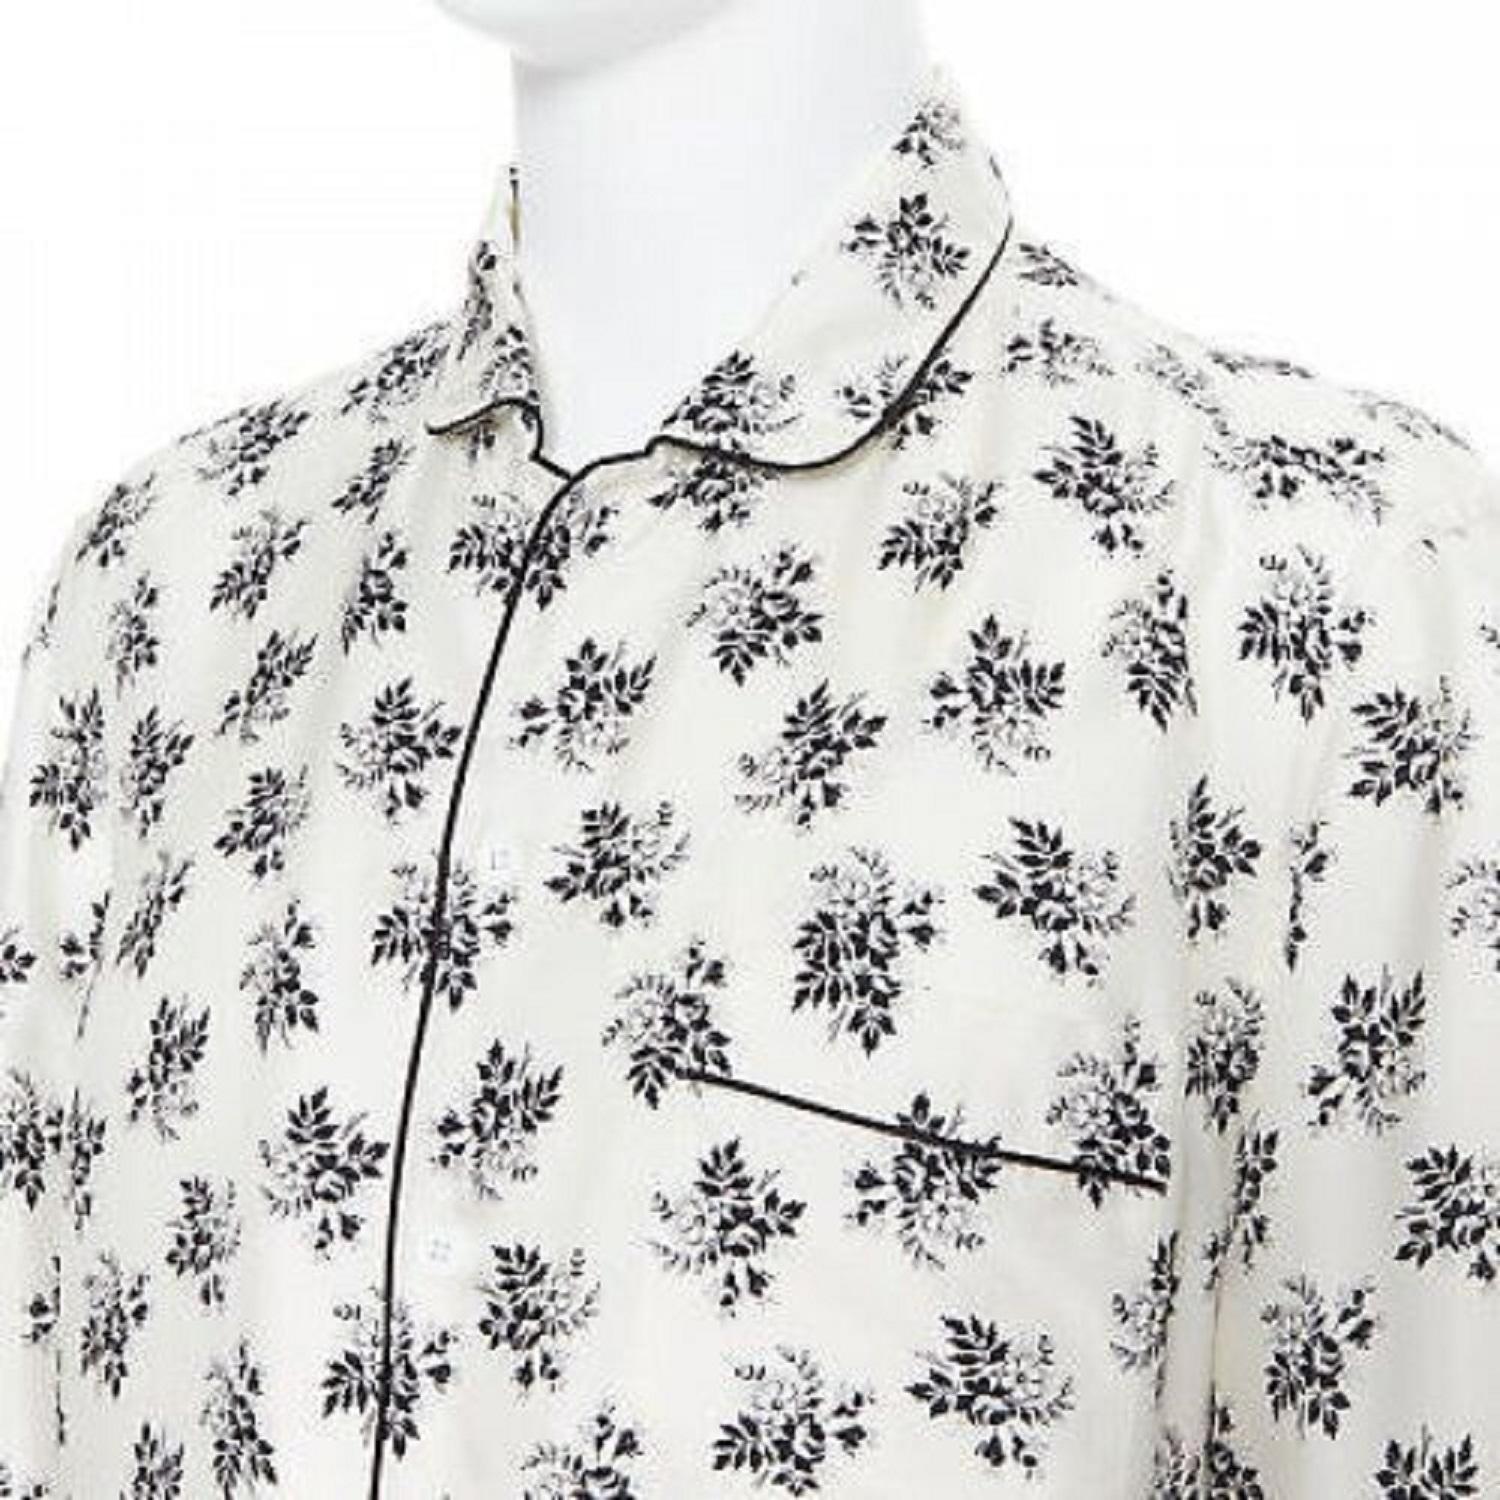 DOLCE GABBANA 100% silk white floral silk print pajama collar casual shirt IT4 M
Reference: CNLE/A00100
Brand: Dolce Gabbana
Designer: Domenico Dolce and Stefano Gabbana
Model: Silk shirt
Material: Silk
Color: White
Pattern: Floral
Closure: